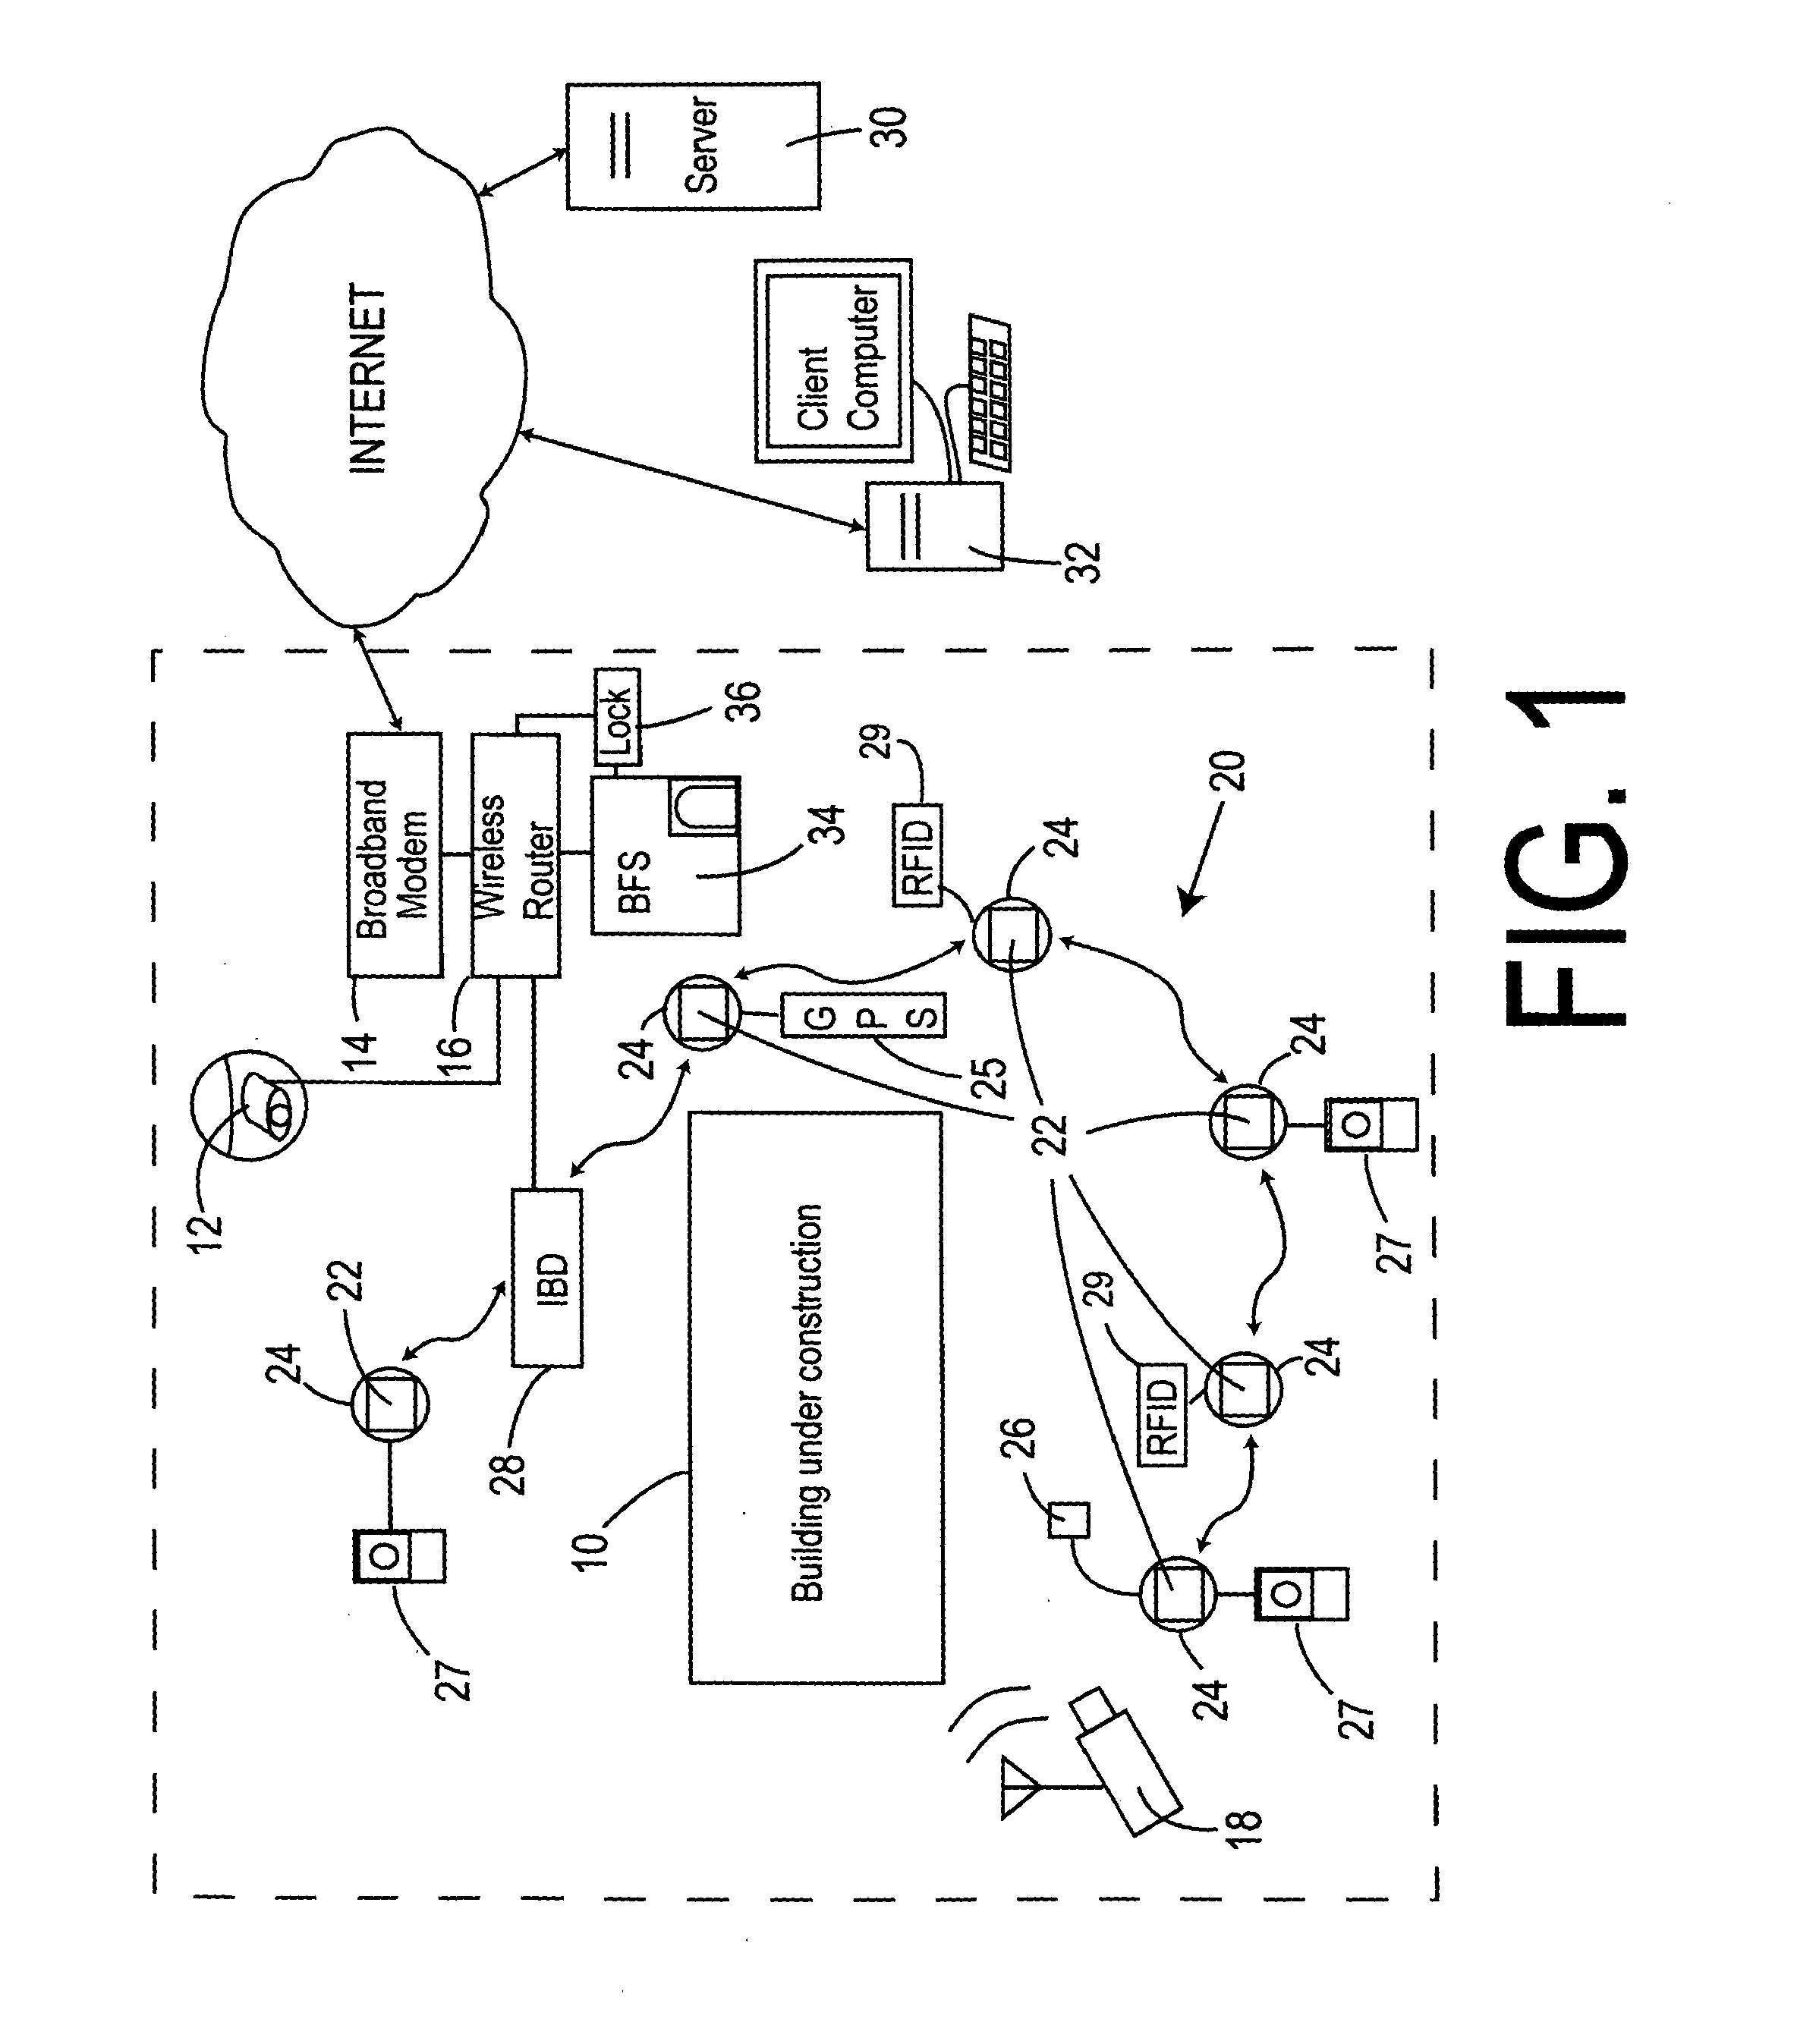 Work site remote monitoring and employee time tracking system and method